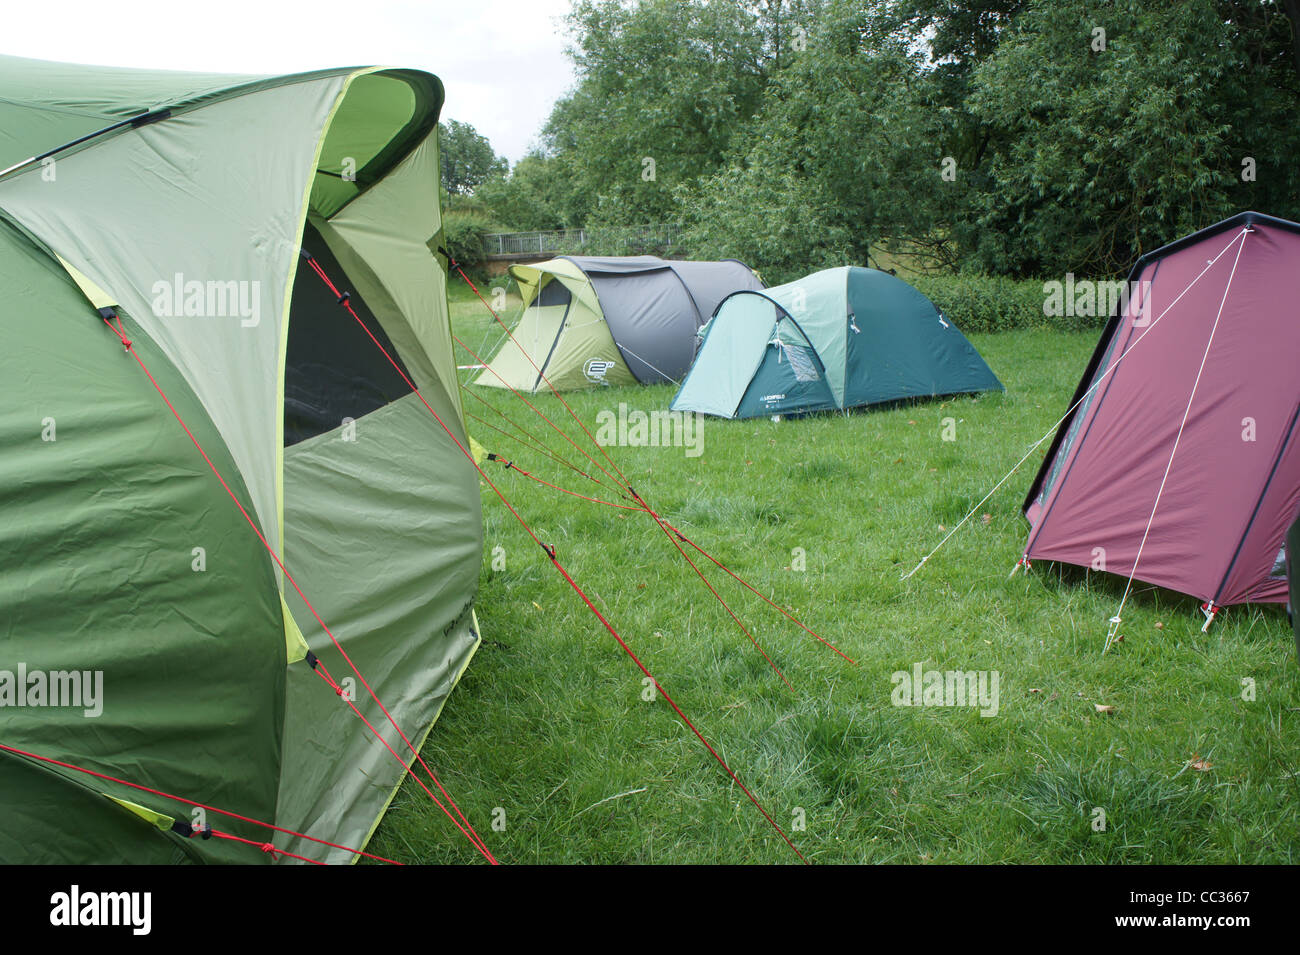 SONY DSC, camping in the great outdoors Stock Photo